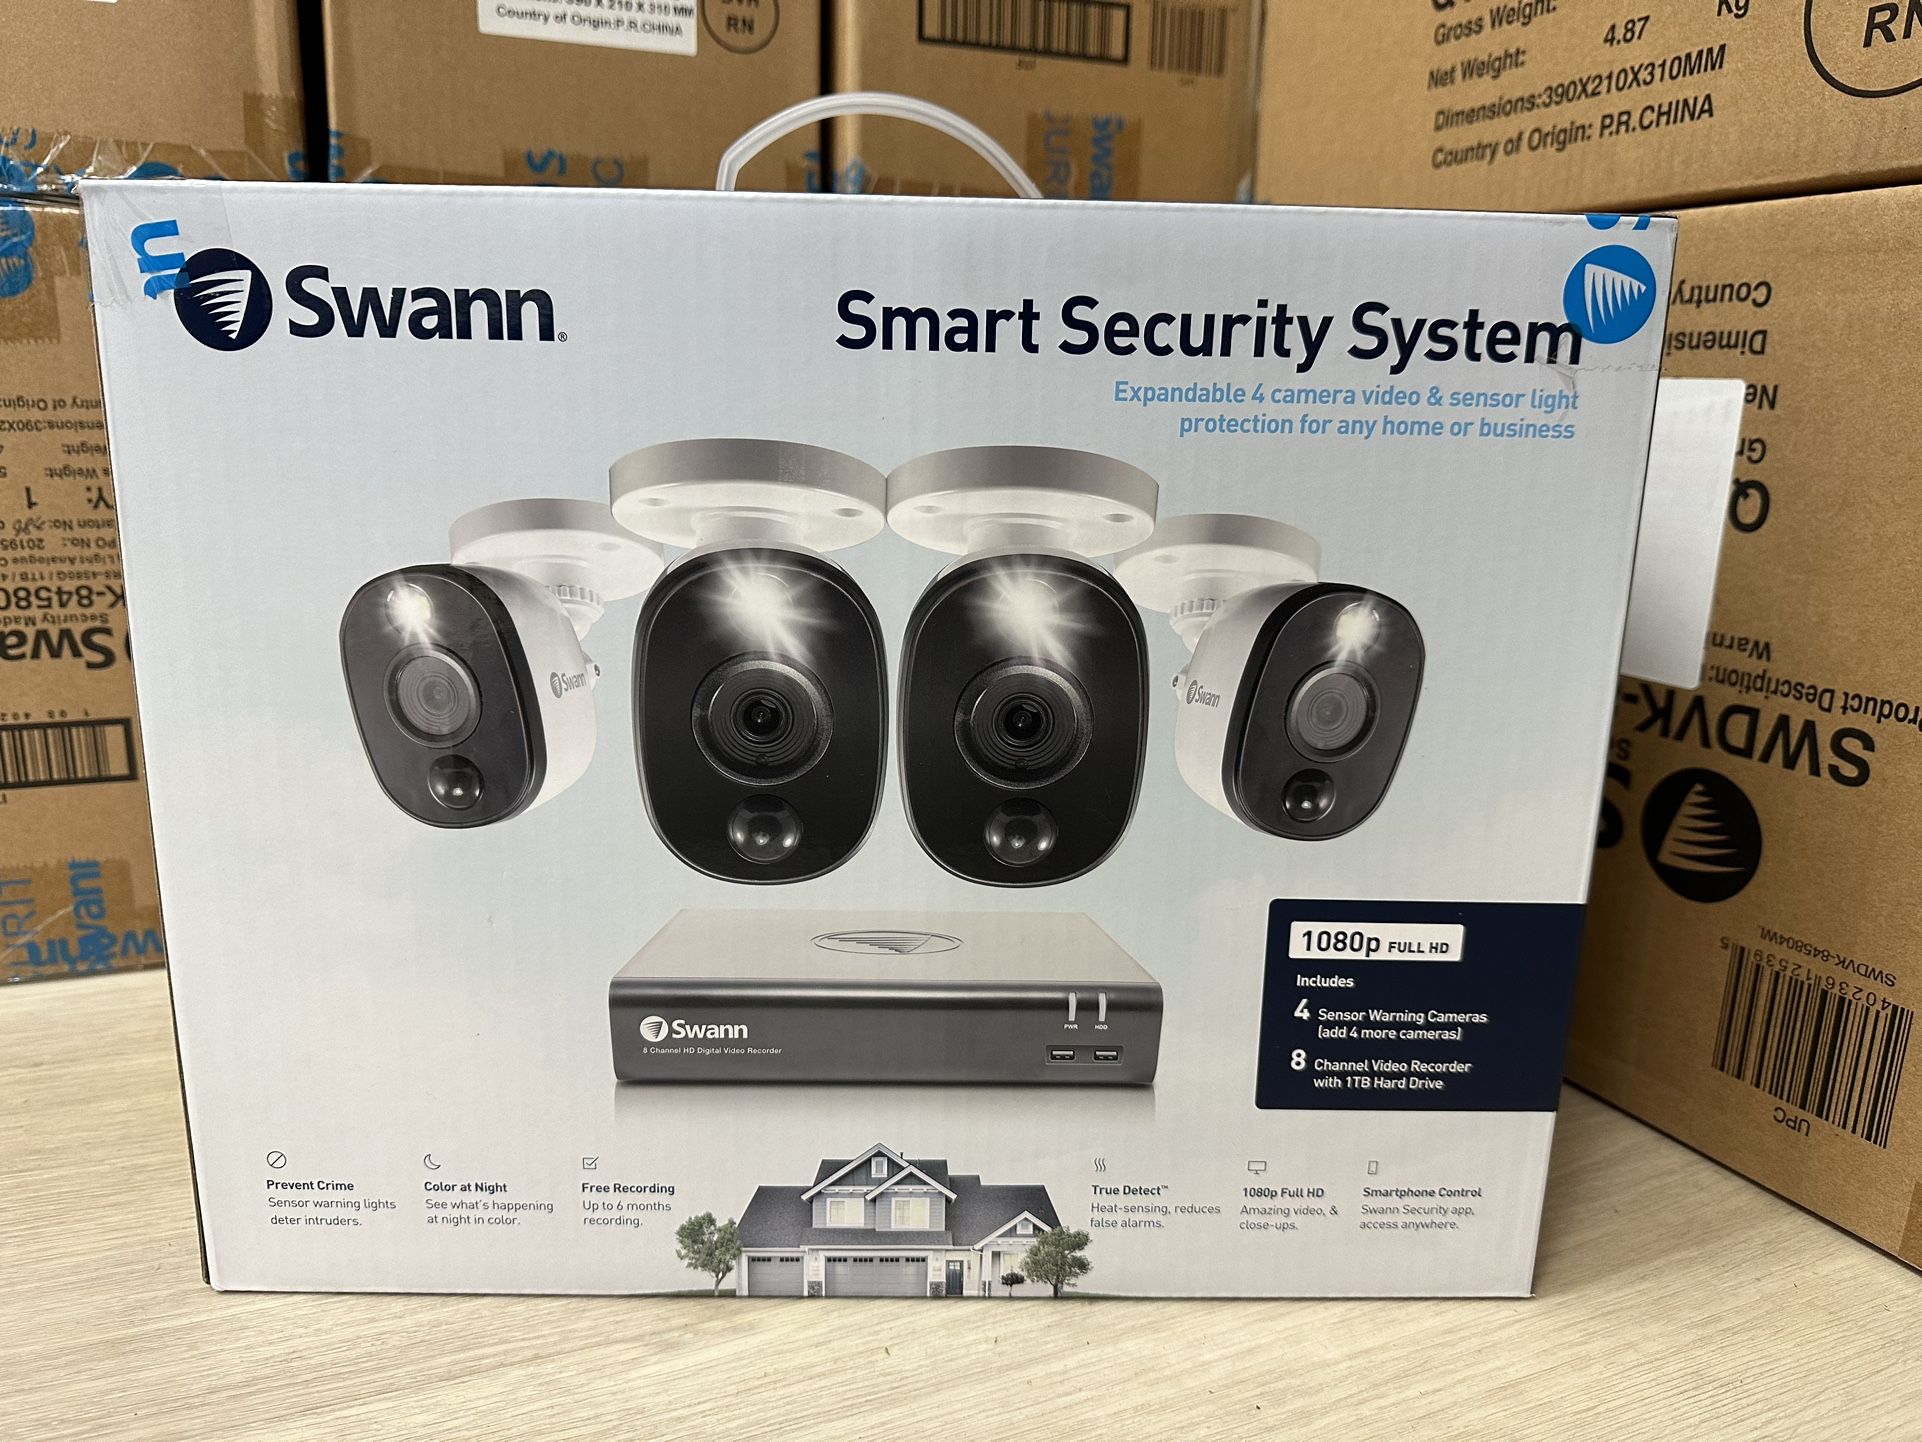 Swann Smart Security System - 4 Cameras And Video Recorder